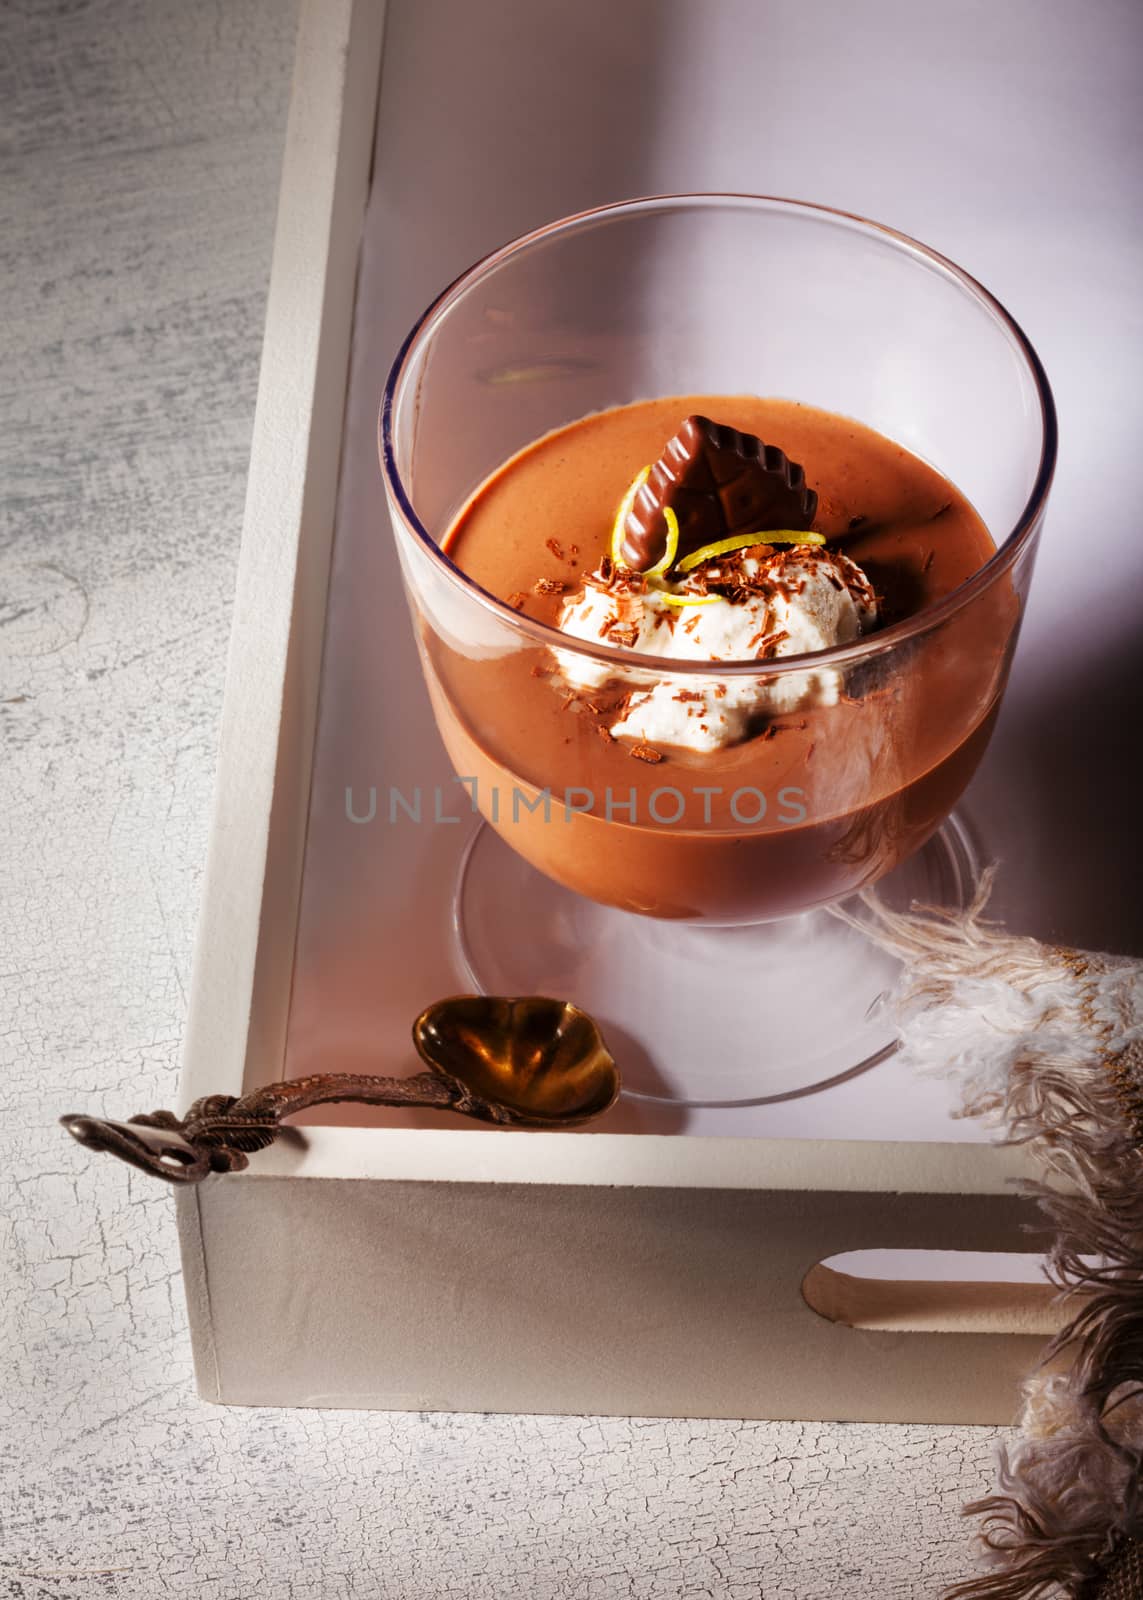 Chocolate Mousse Dessert with cream on a table